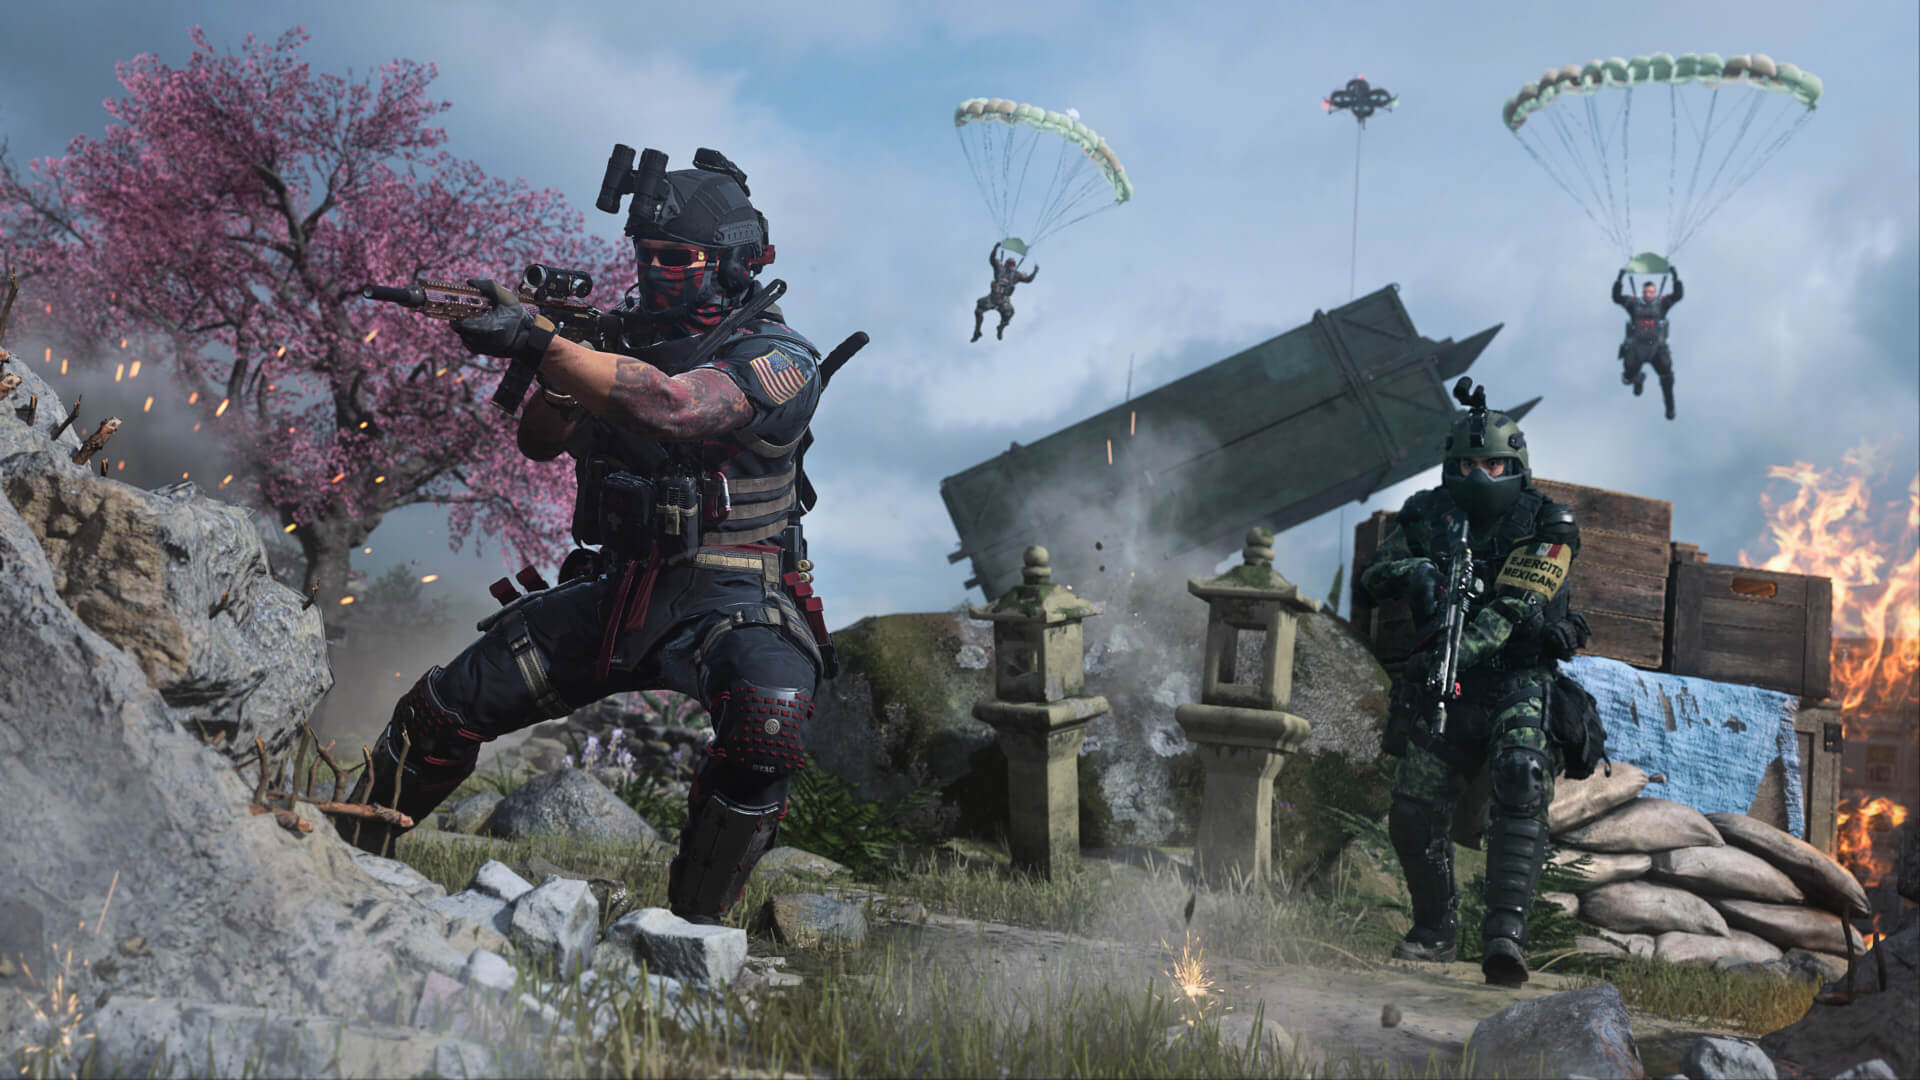 Soldiers parachuting onto the battlefield in the Activision Blizzard game Call of Duty: Warzone 2.0